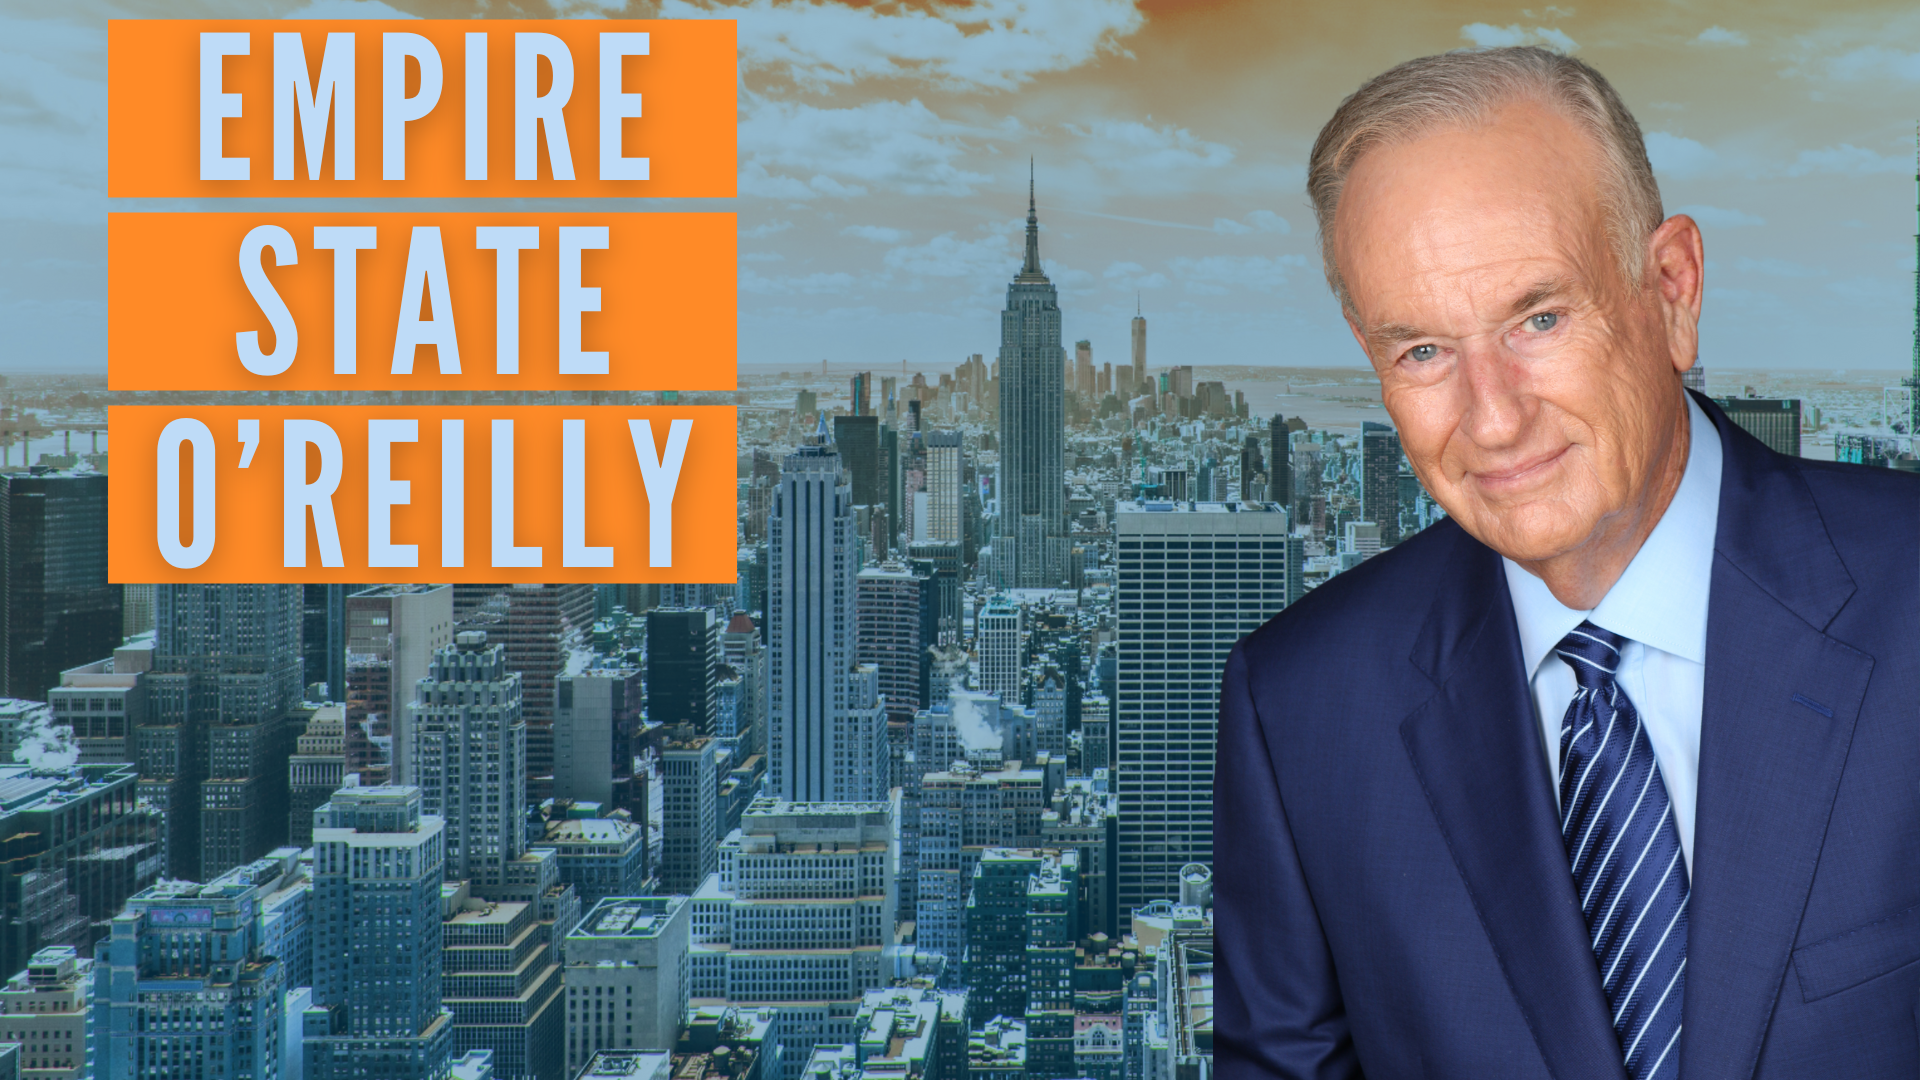 Empire State O'Reilly: Taxes & Reparations